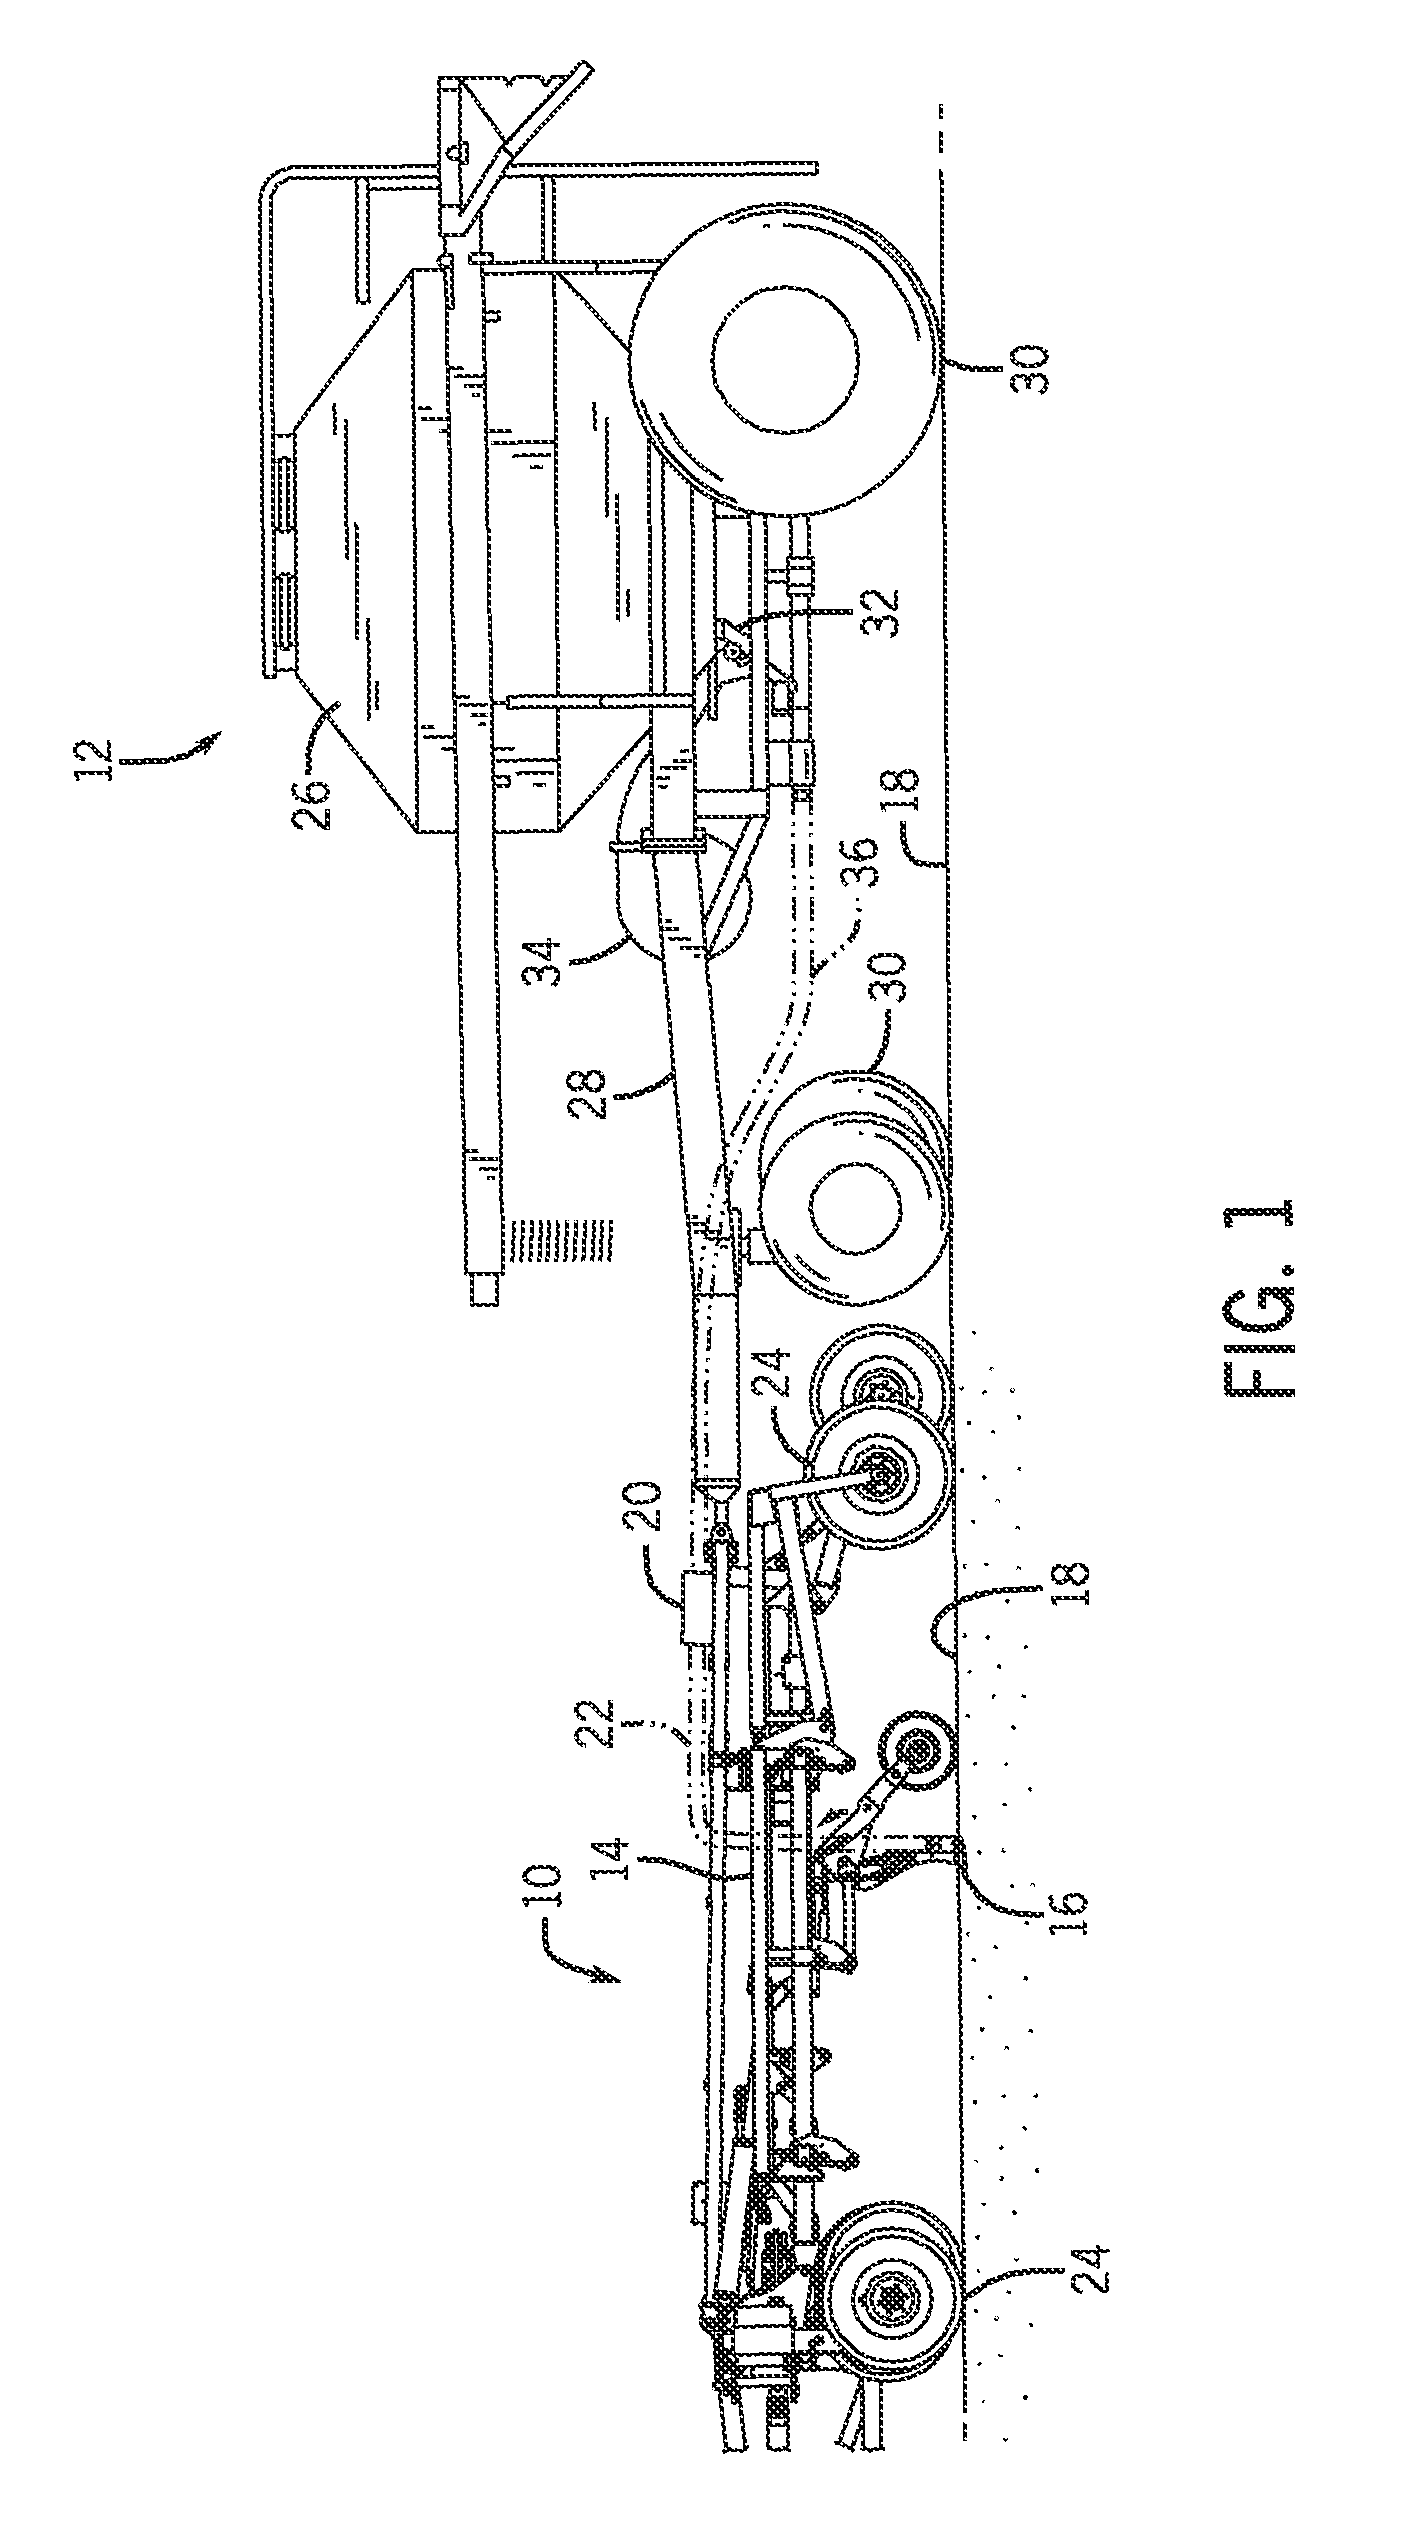 System and method for measuring product flow to an agricultural implement